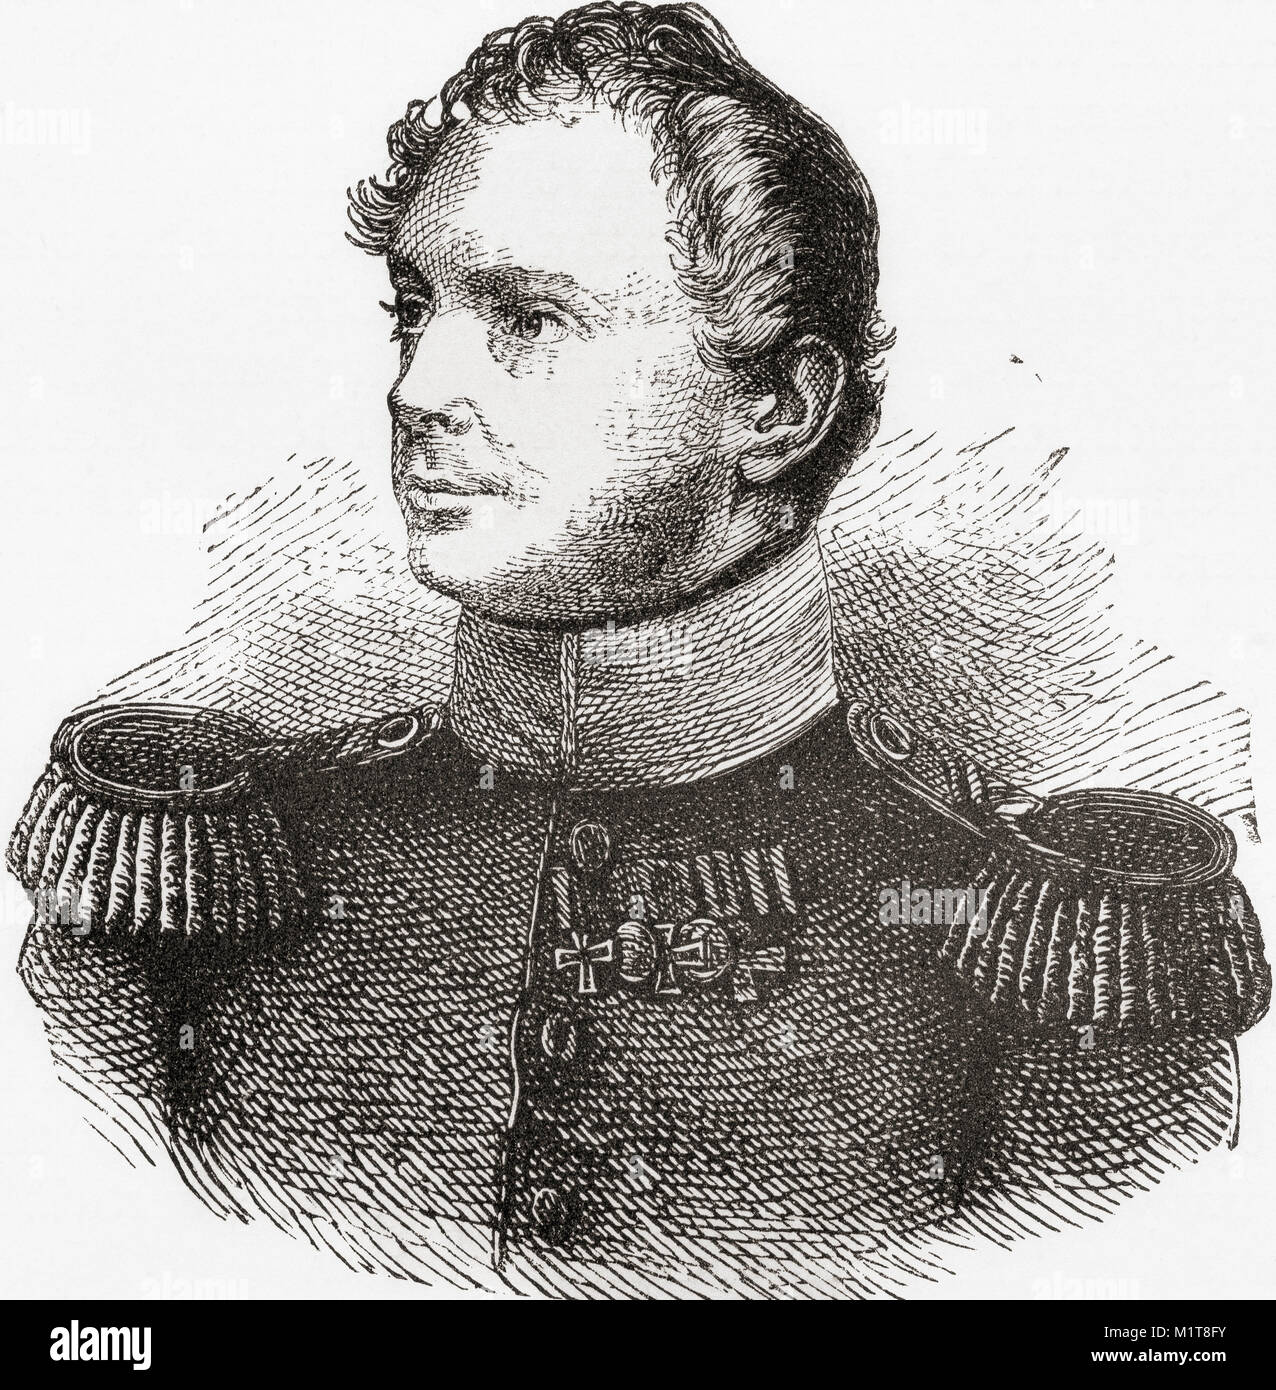 Frederick William IV, 1795 - 1861.  King of Prussia from 1840 to 1861.  From Ward and Lock's Illustrated History of the World, published c.1882. Stock Photo